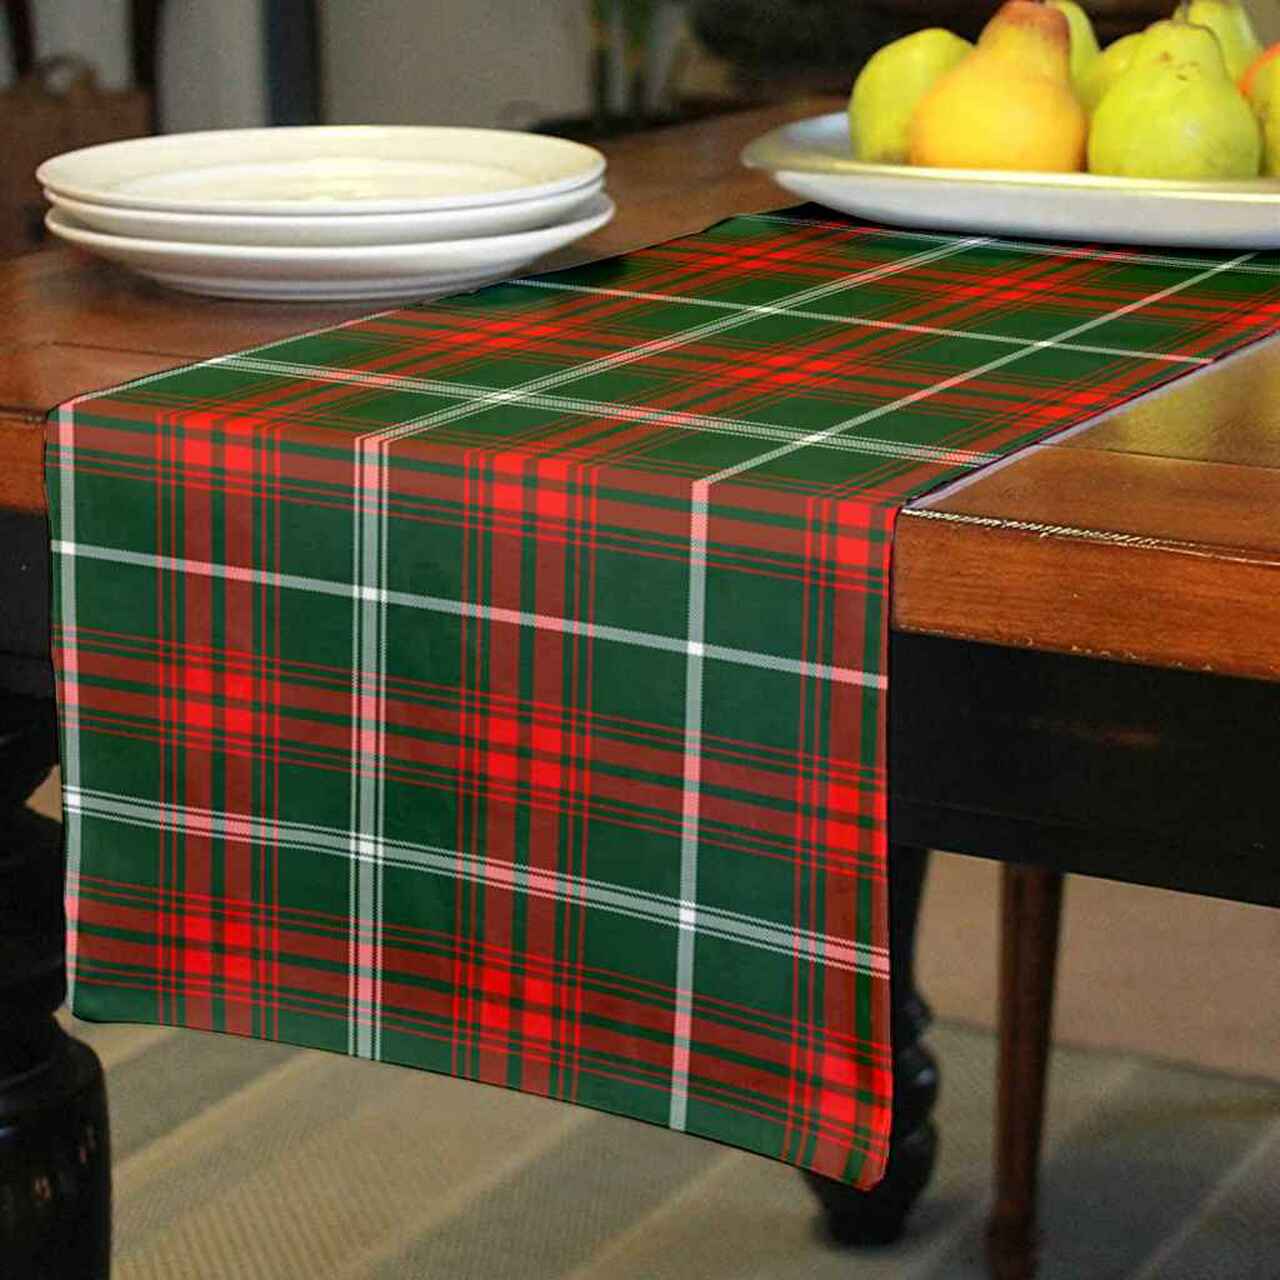 Prince of Wales Tartan Table Runner - Cotton table runner